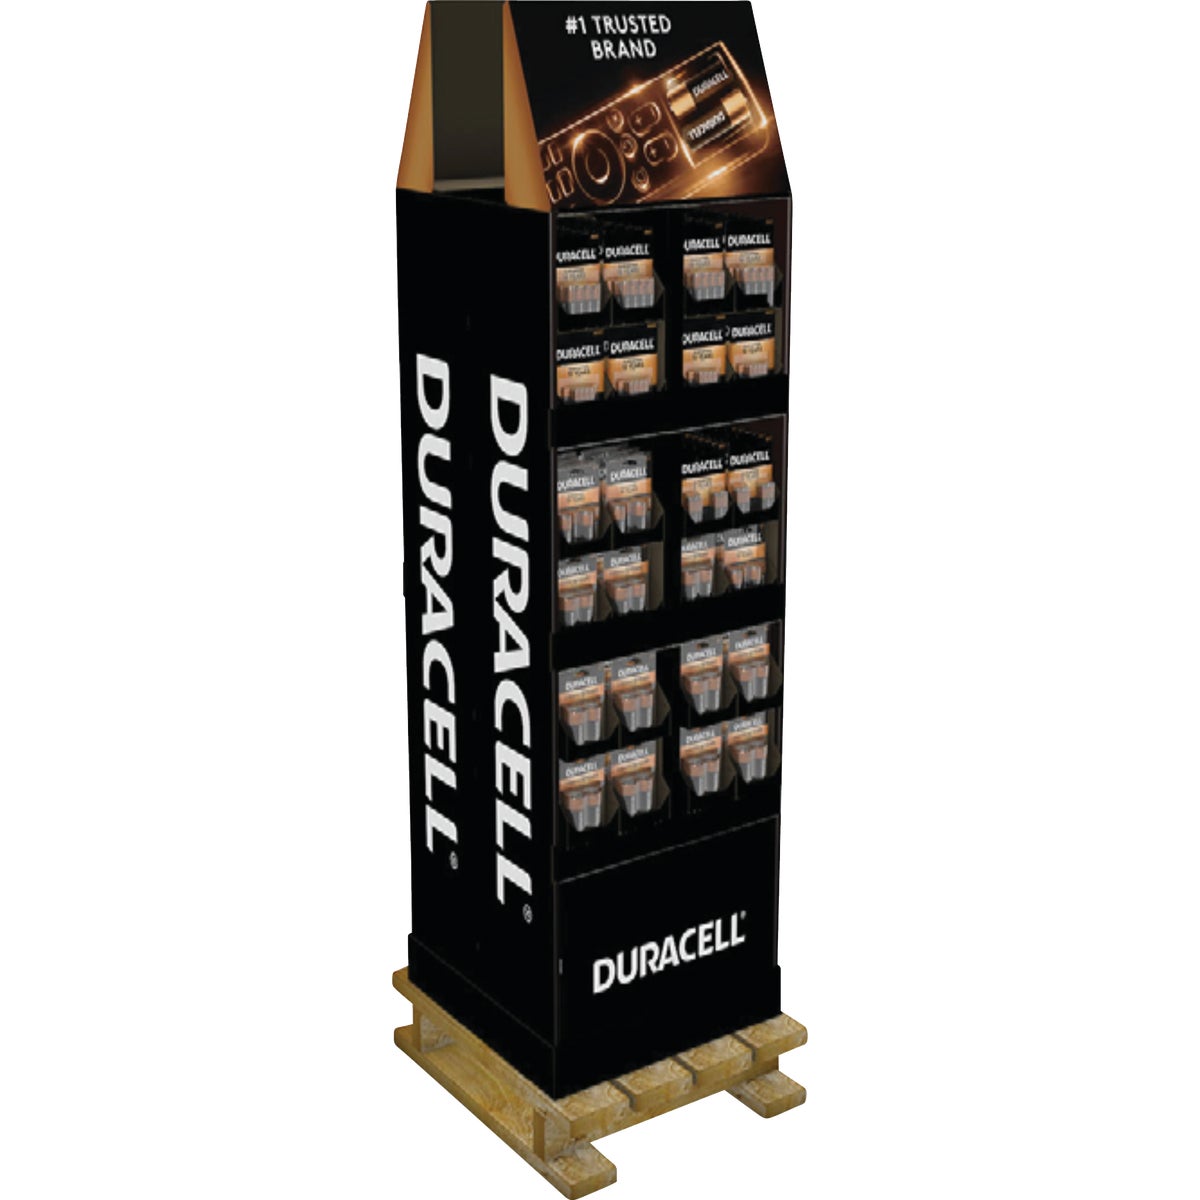 Duracell Alkaline Battery Saver Pack Display (323-Count)